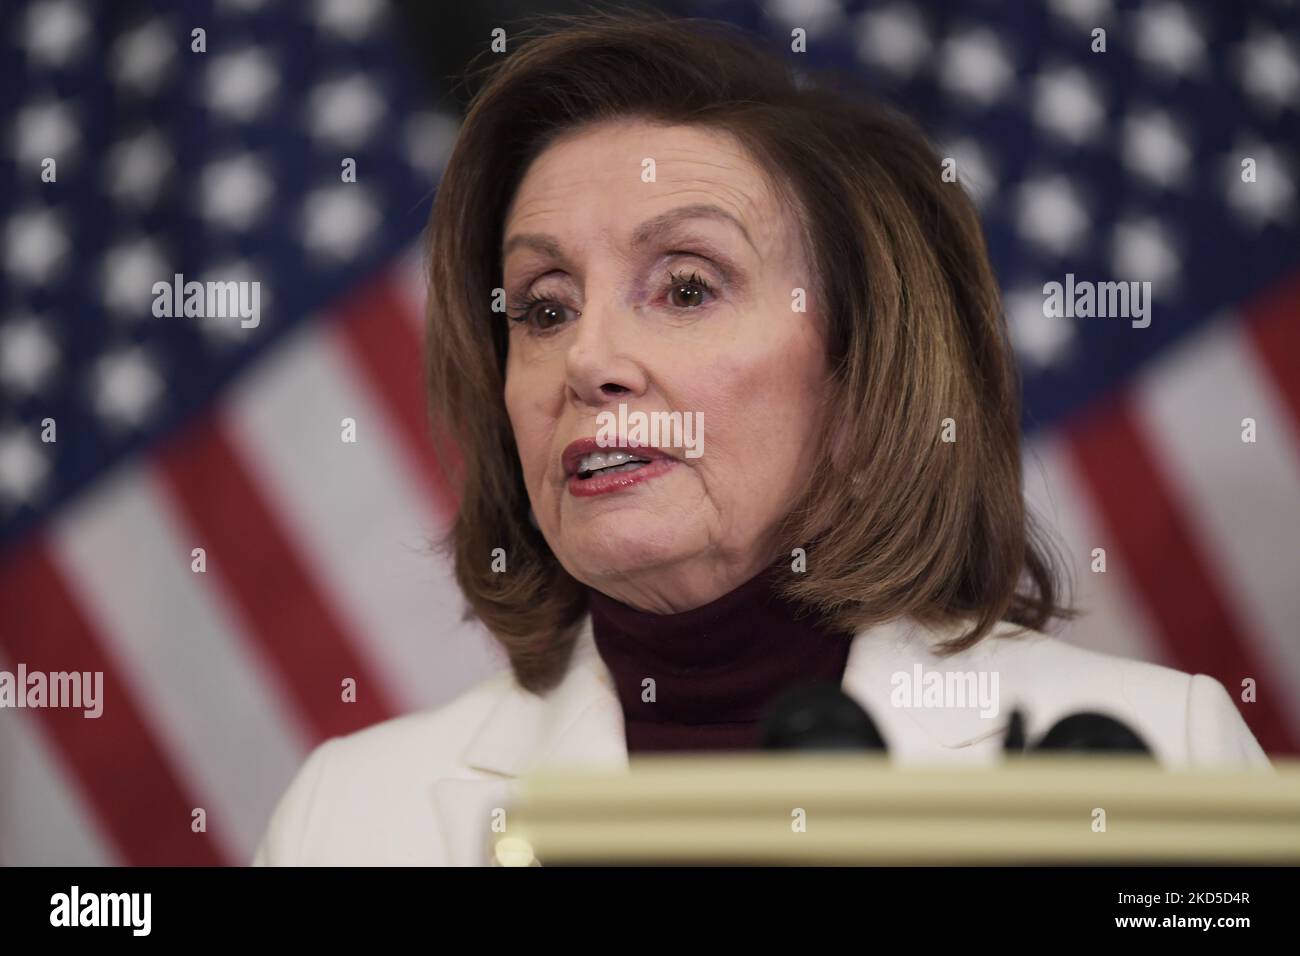 House Speaker Nancy Pelosi(D-CA) alongside House Democratic Womens caucus speaks about Jobs and global economic during an Equal Pay Day press event, today on march 15, 2022 at Rayburn Room/Capitol Hill in Washington DC, USA. (Photo by Lenin Nolly/NurPhoto) Stock Photo